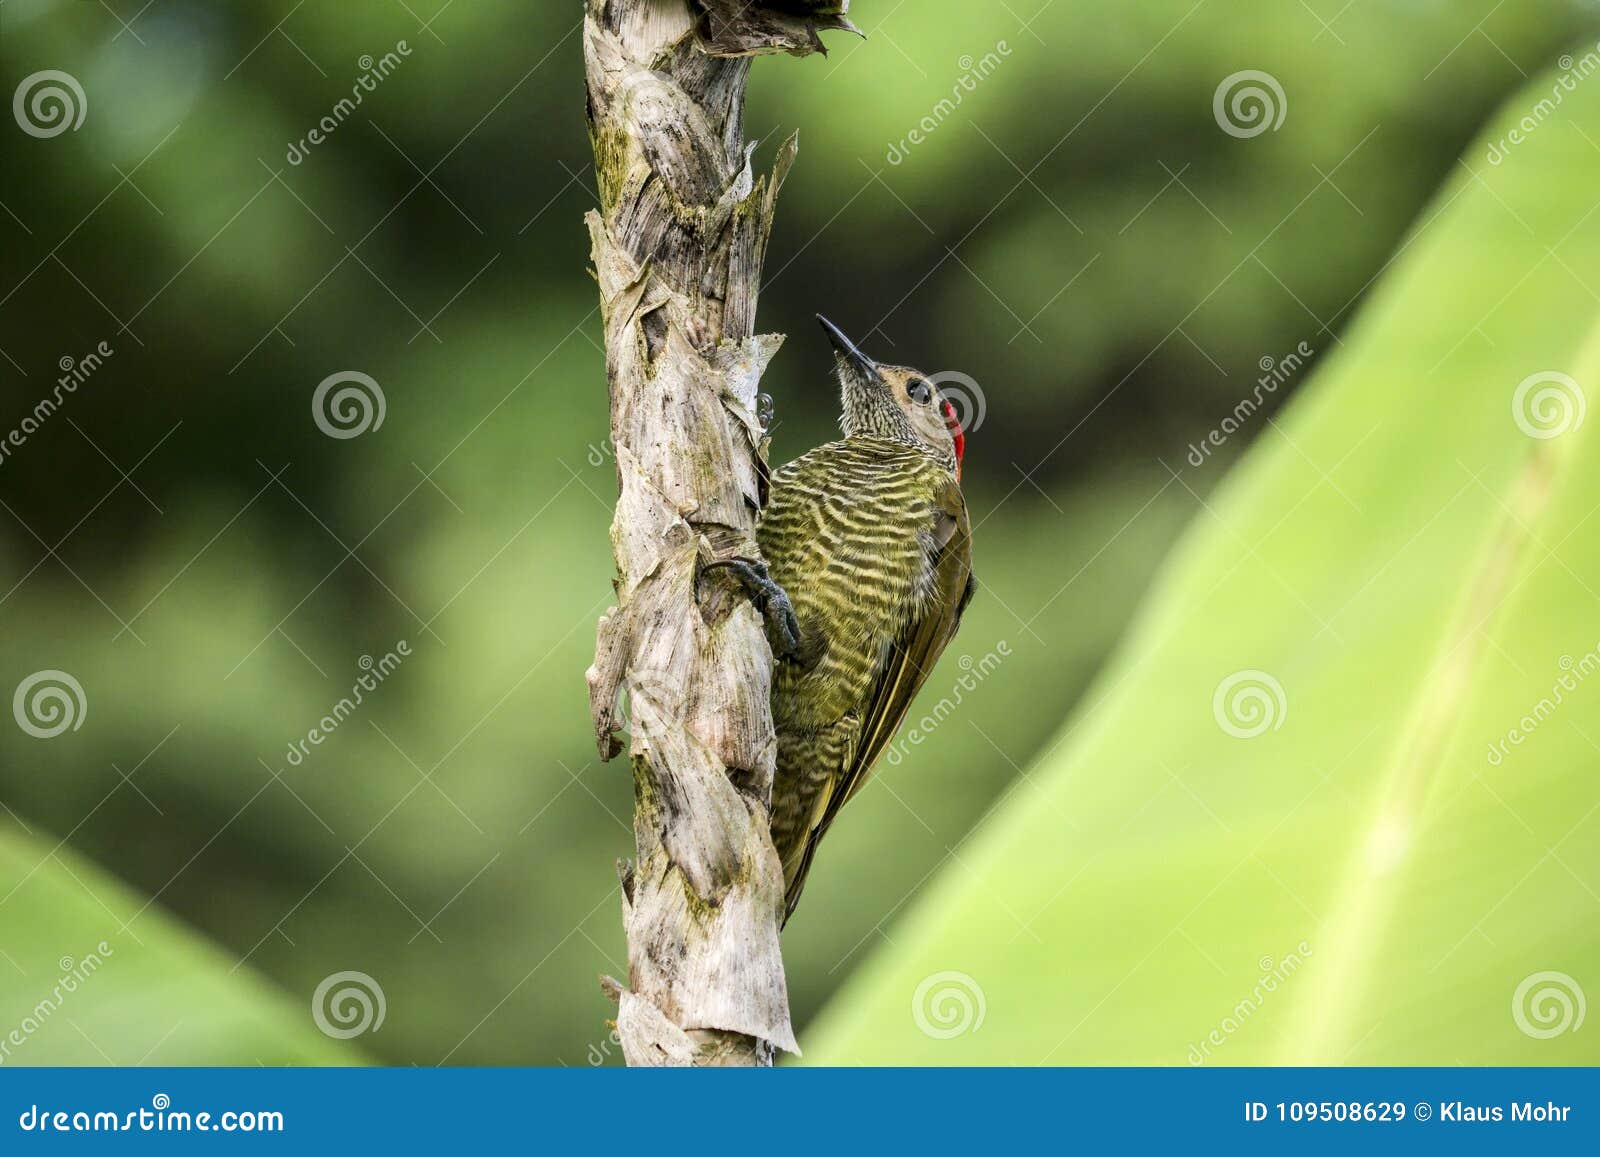 golden-olive woodpecker on a tiny trunk